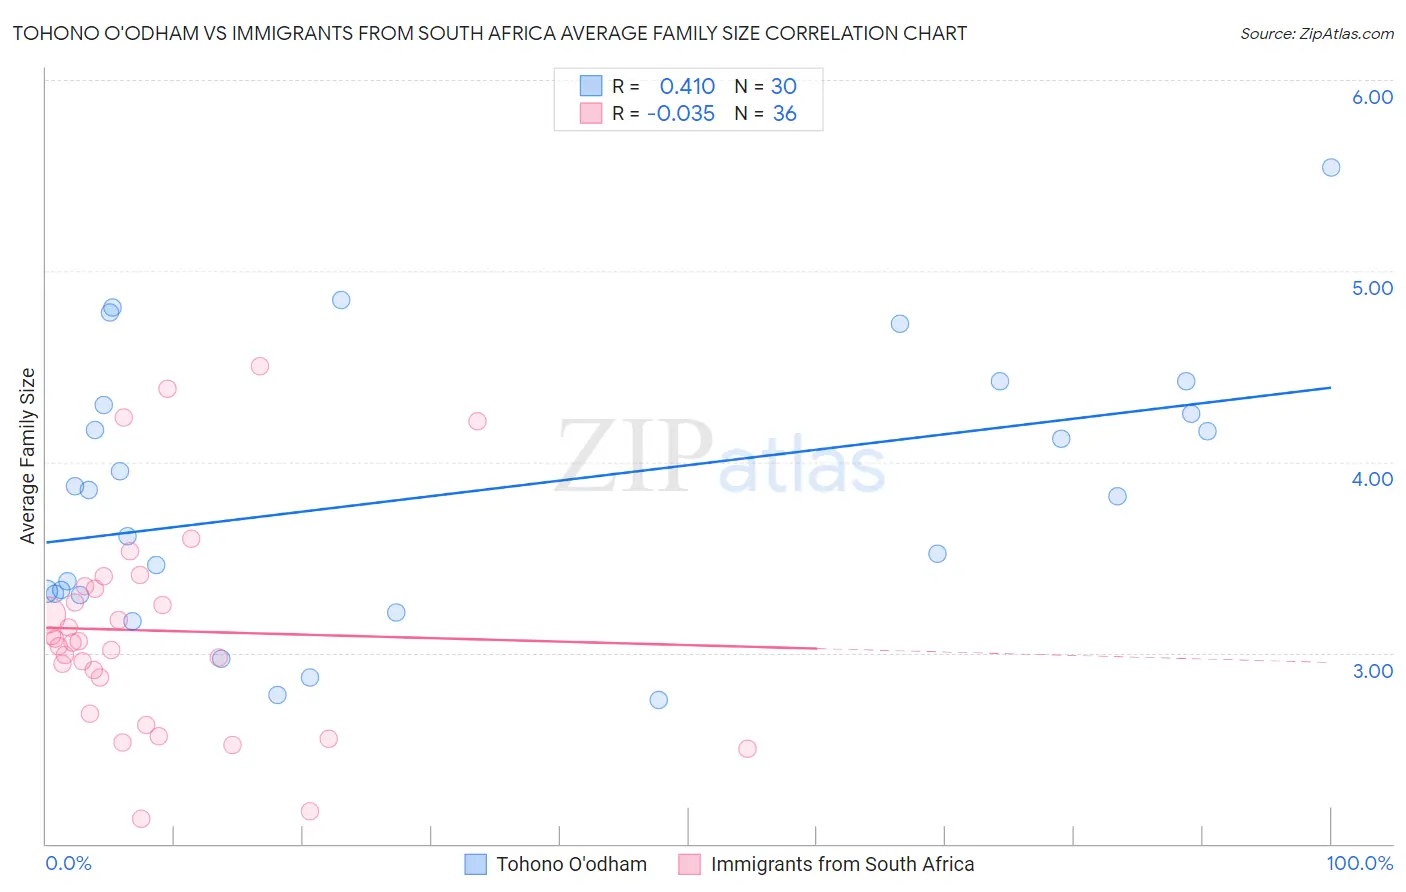 Tohono O'odham vs Immigrants from South Africa Average Family Size